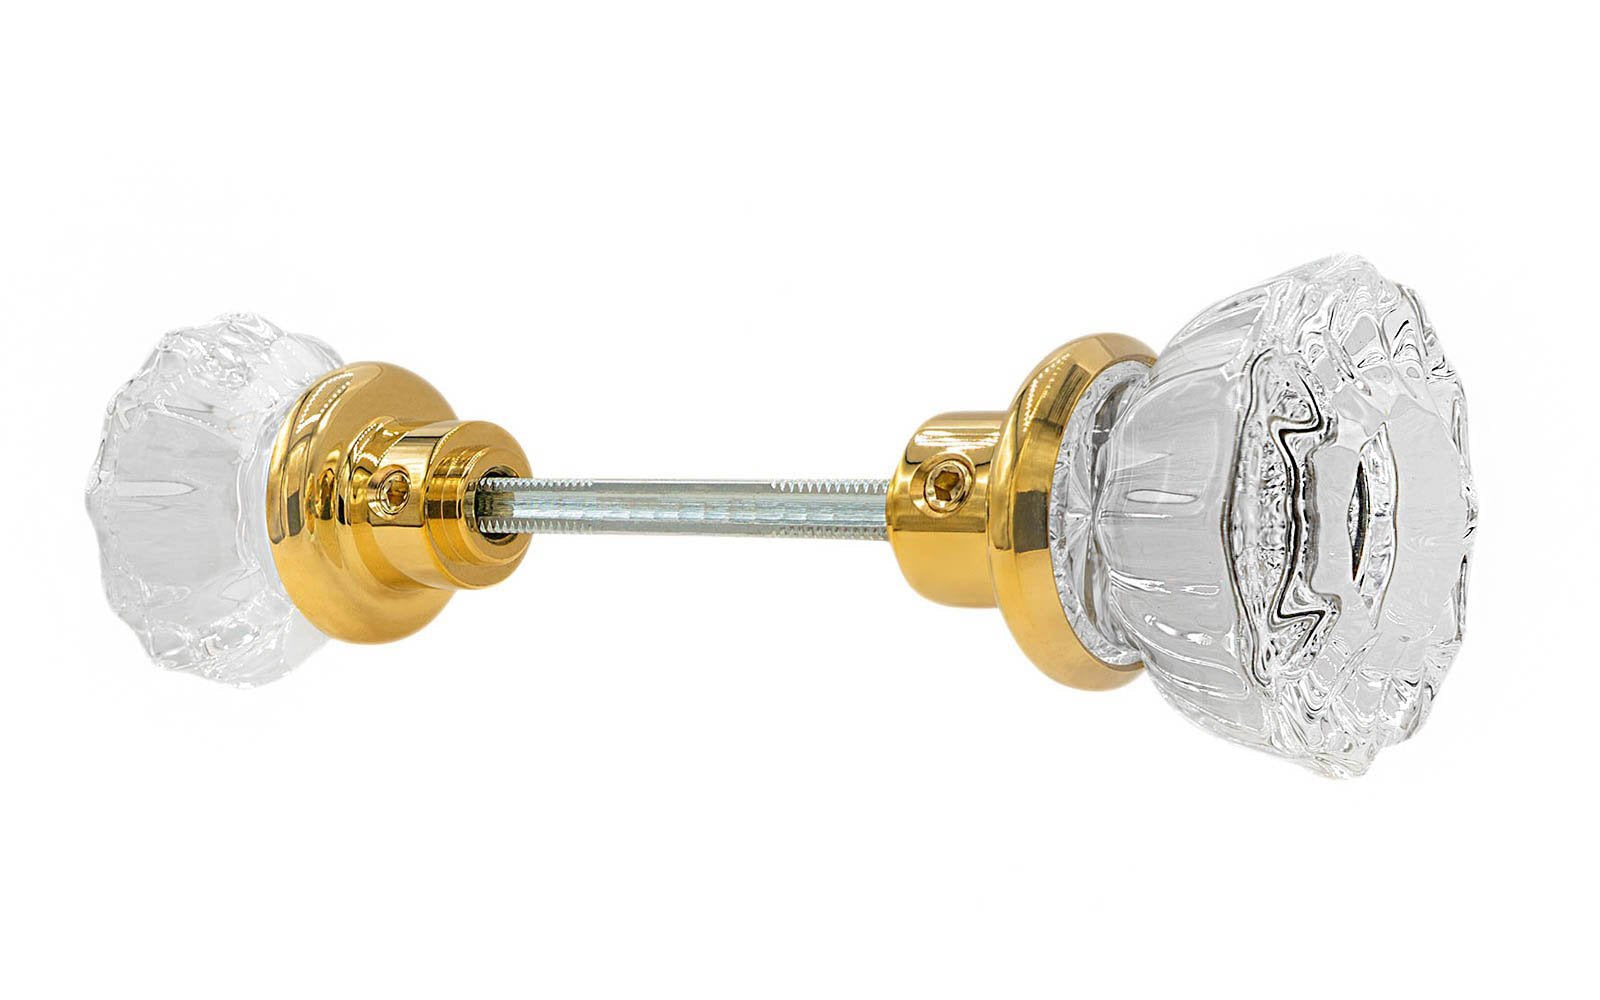 Pair of Classic Fluted Clear Glass Doorknobs with spindle. A high quality & genuine glass doorknob set with an attractive fluted design. The sparkling center point under glass amplifies reflected light to showcase beautiful facets. Solid brass base. Reproduction Glass Door Knobs. Traditional Fluted Glass Knobs. Unlacquered brass (will patina naturally), Non-Lacquered Brass.